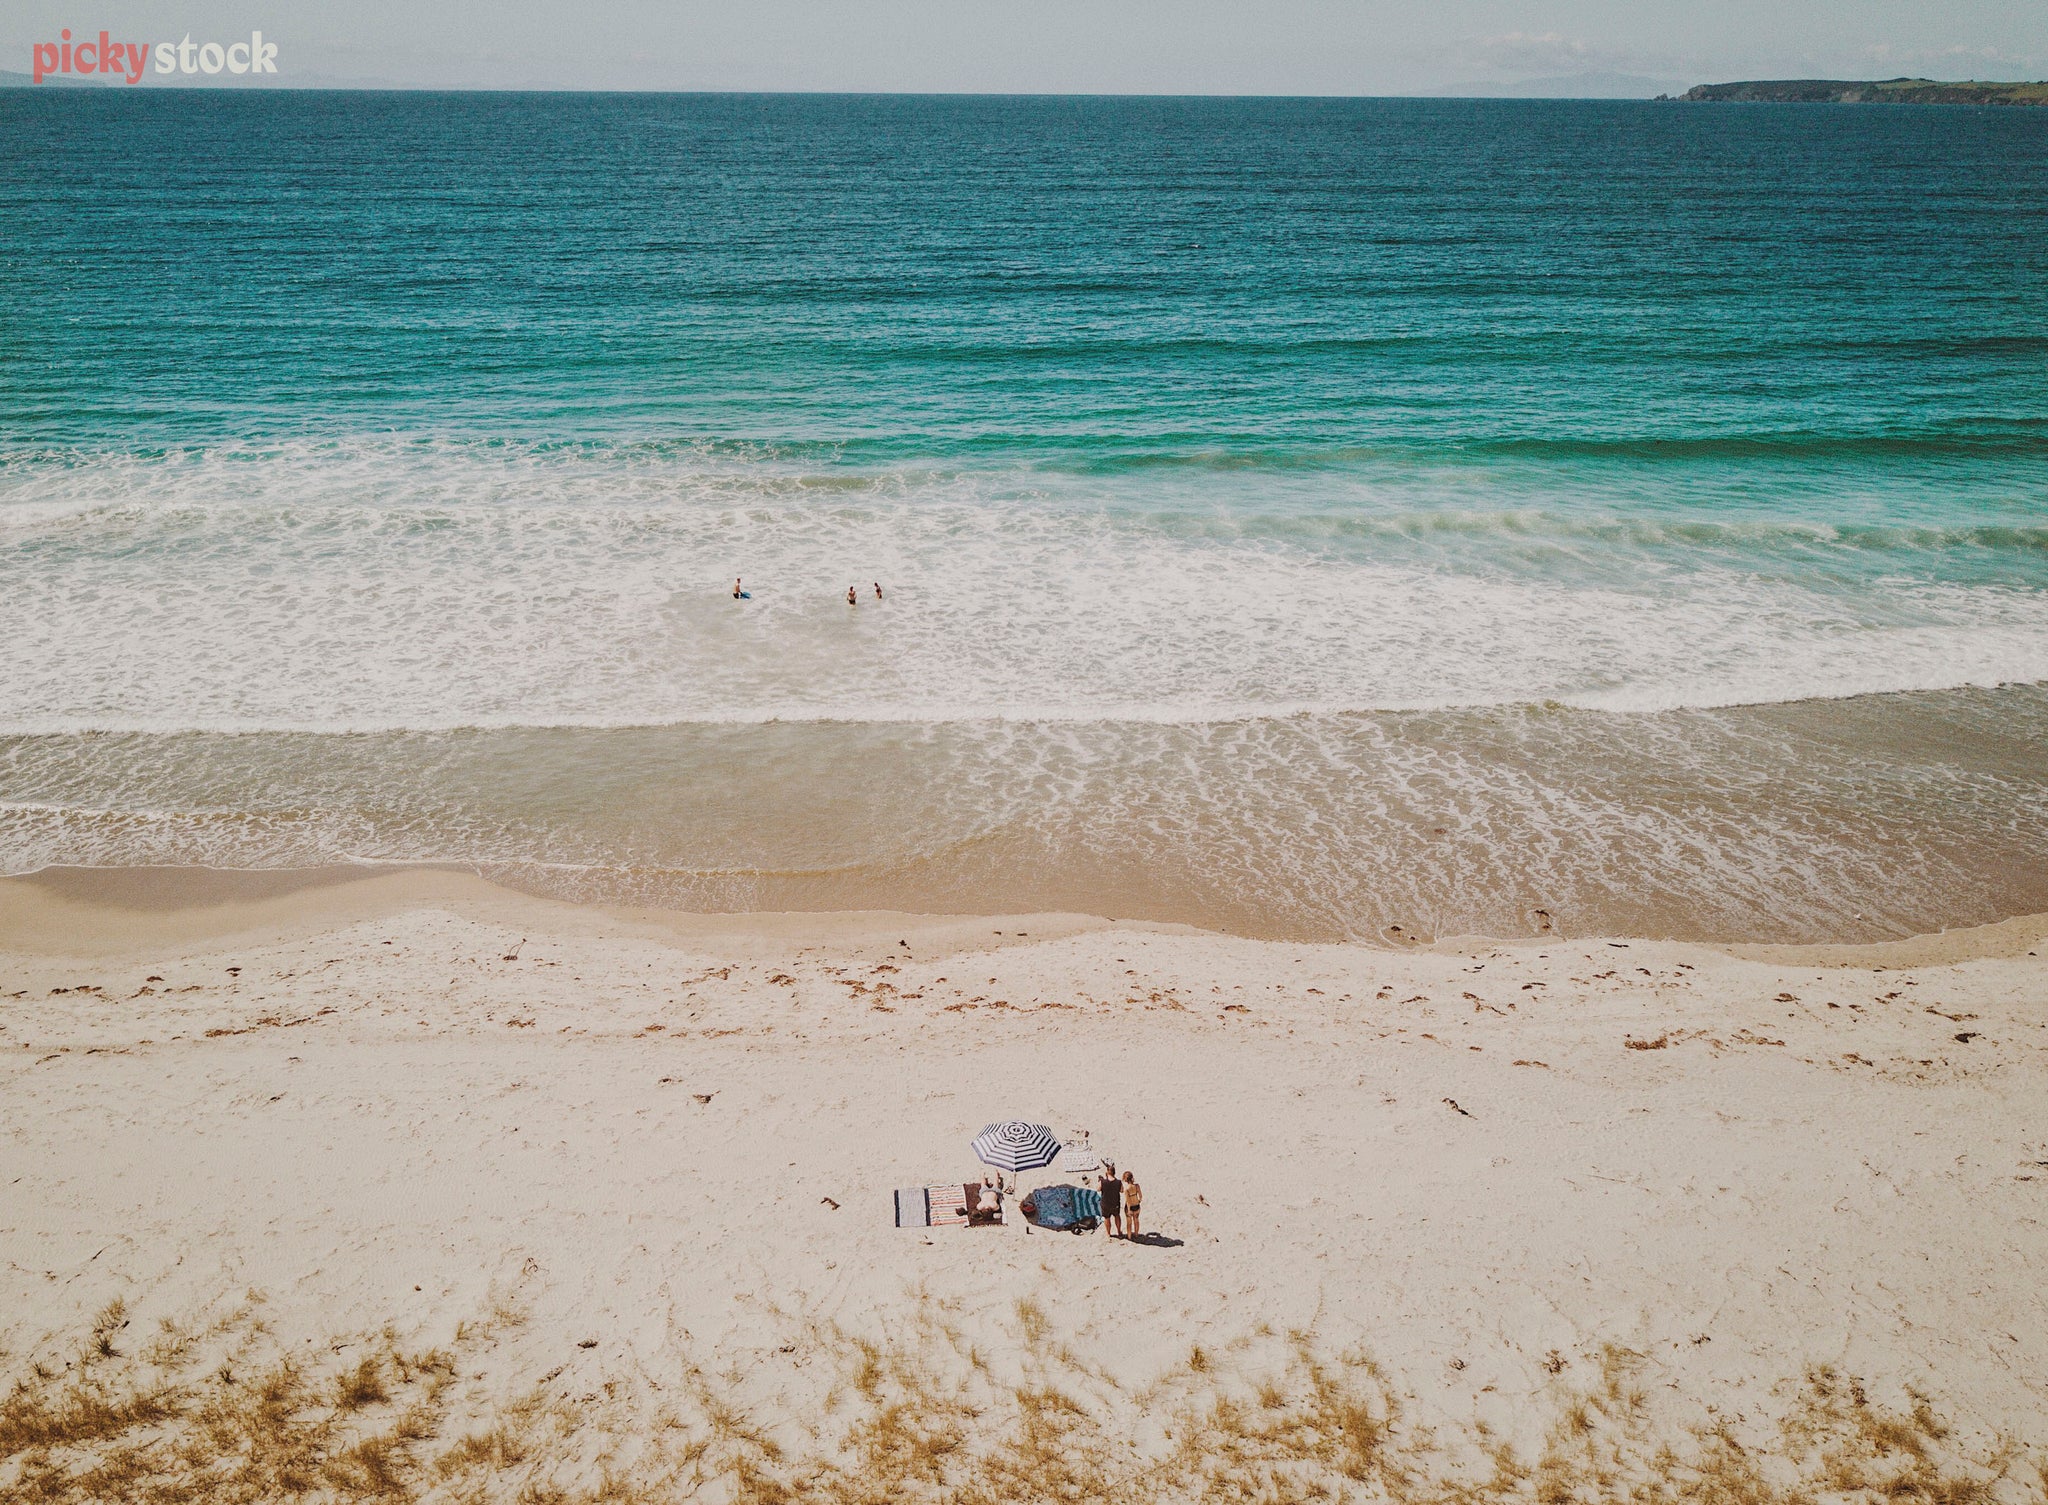 High angle aerial image of young group of people sitting on towels at the beach. The shot is very graphic, the people are small and speckled, with white sand and blue sea creating stark contrast.